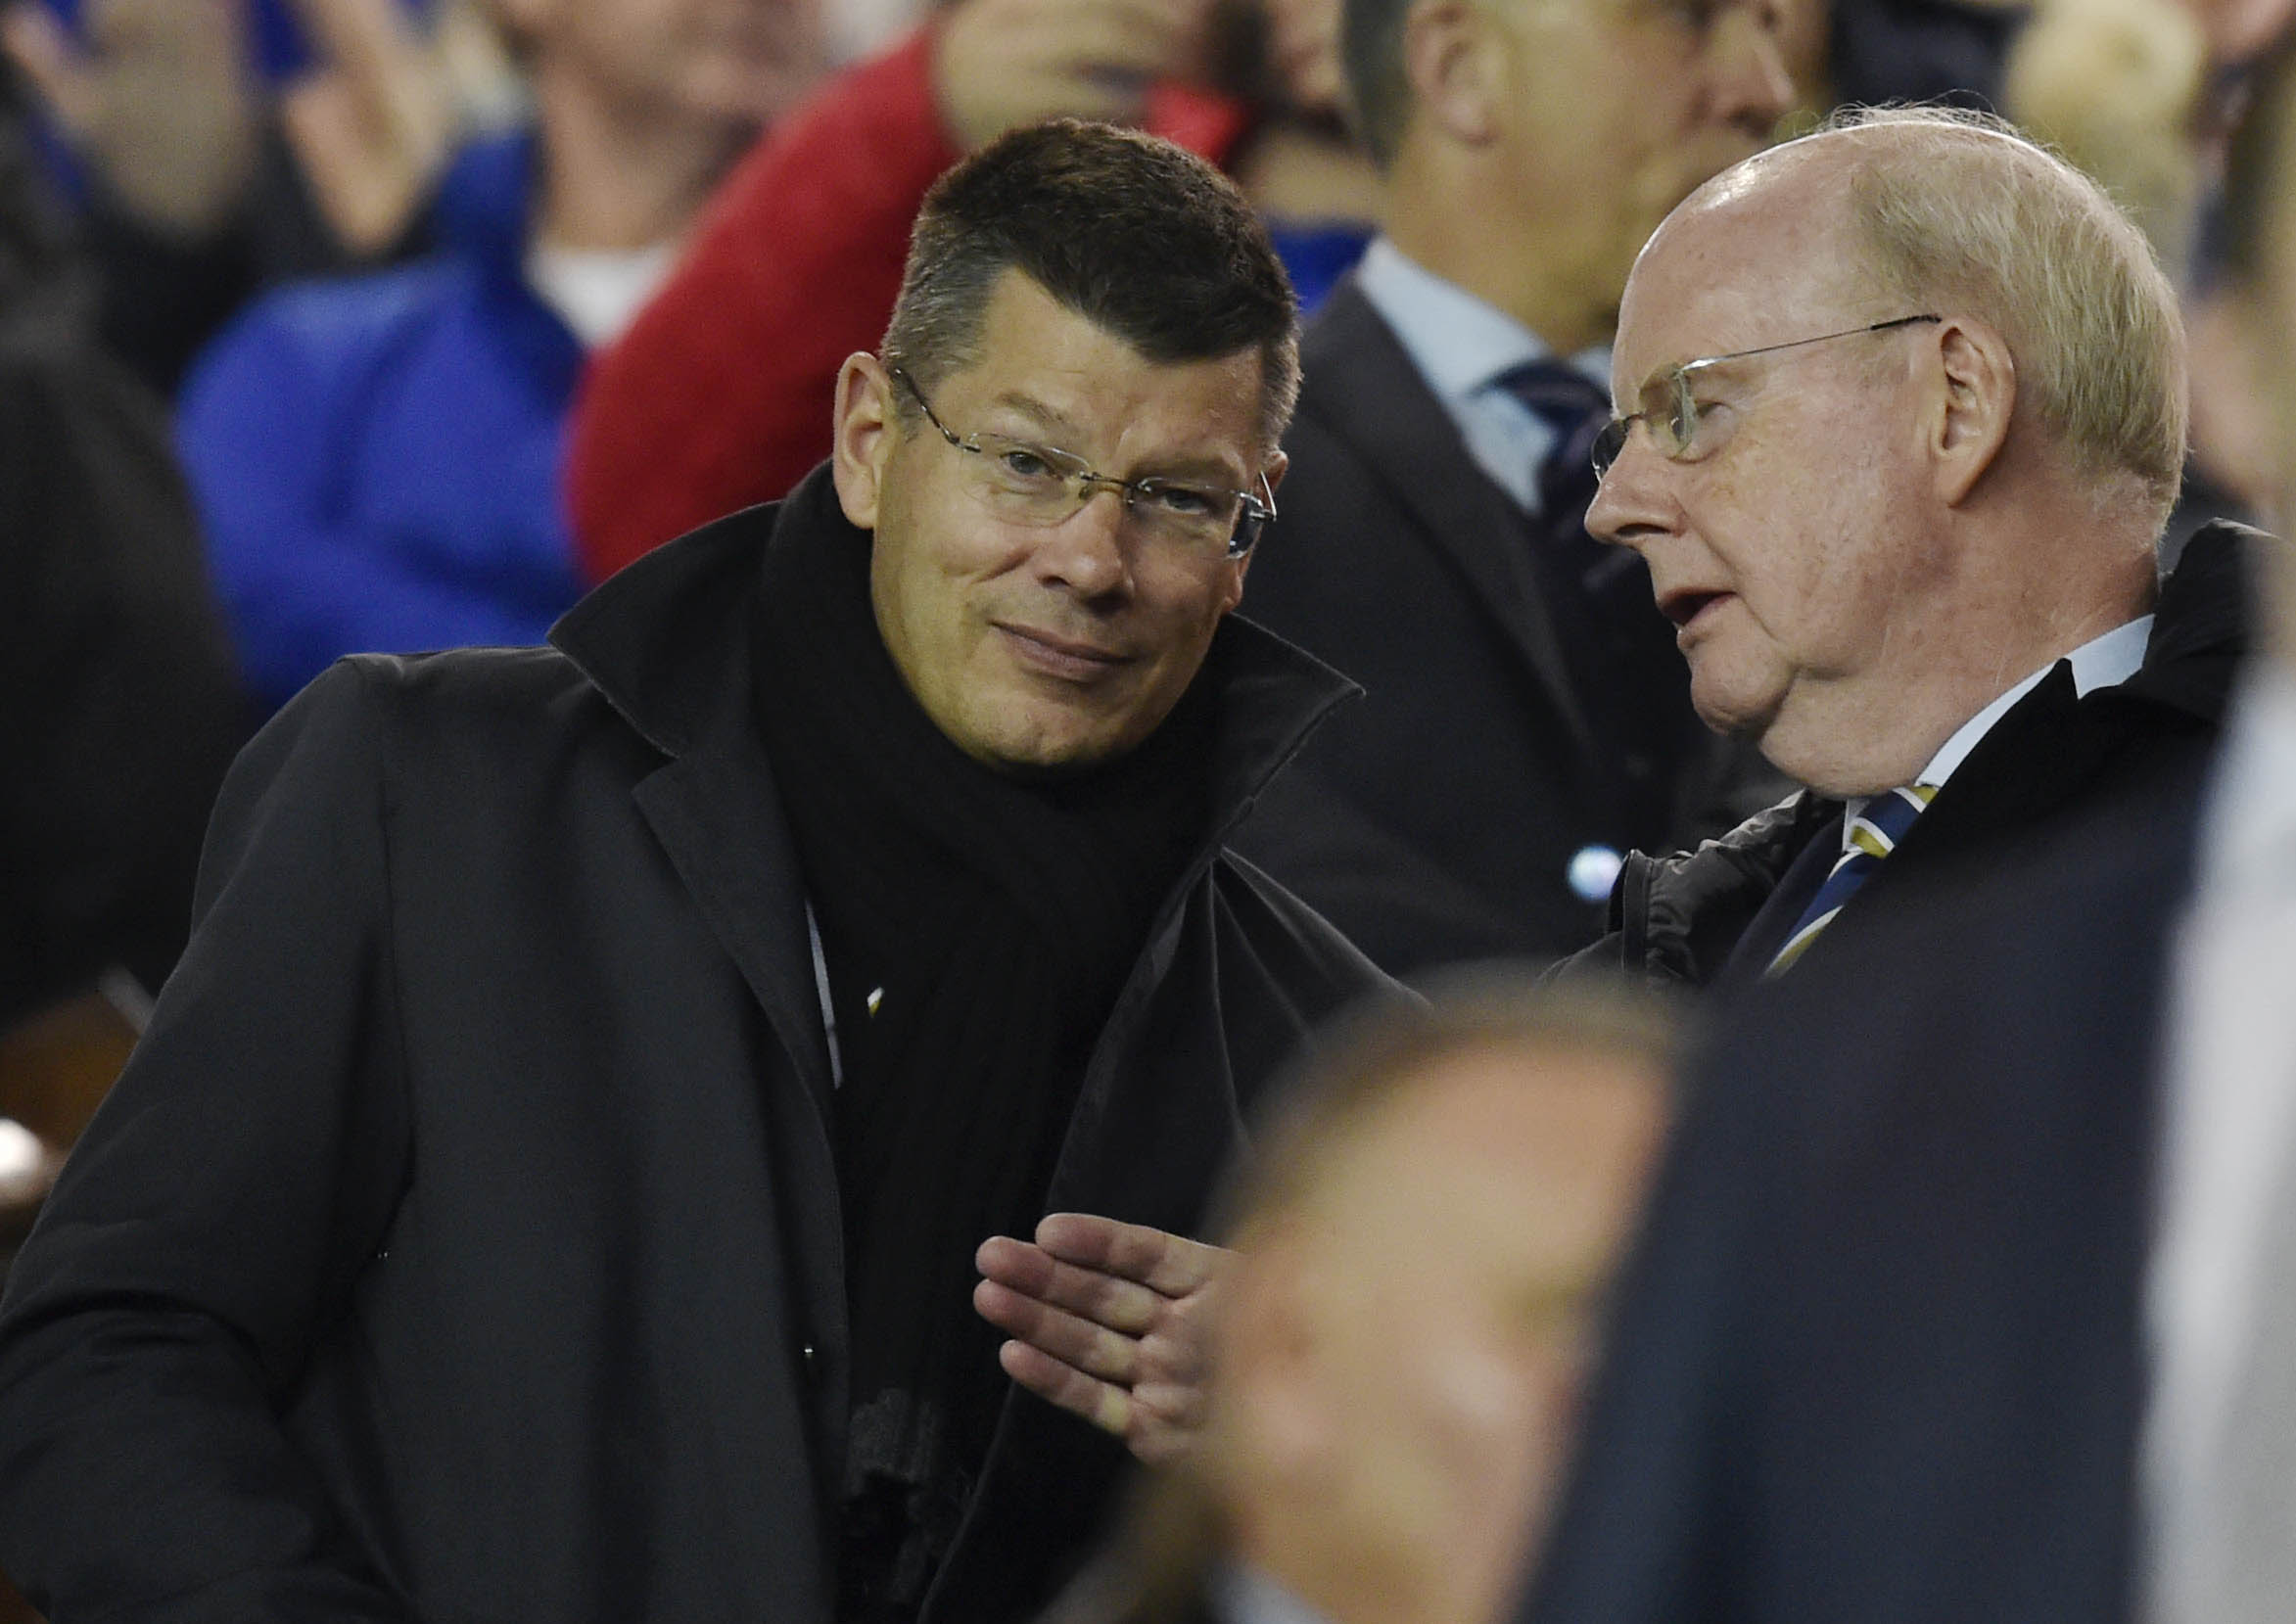 SPFL chief exec Neil Doncaster on Hearts' legal bid